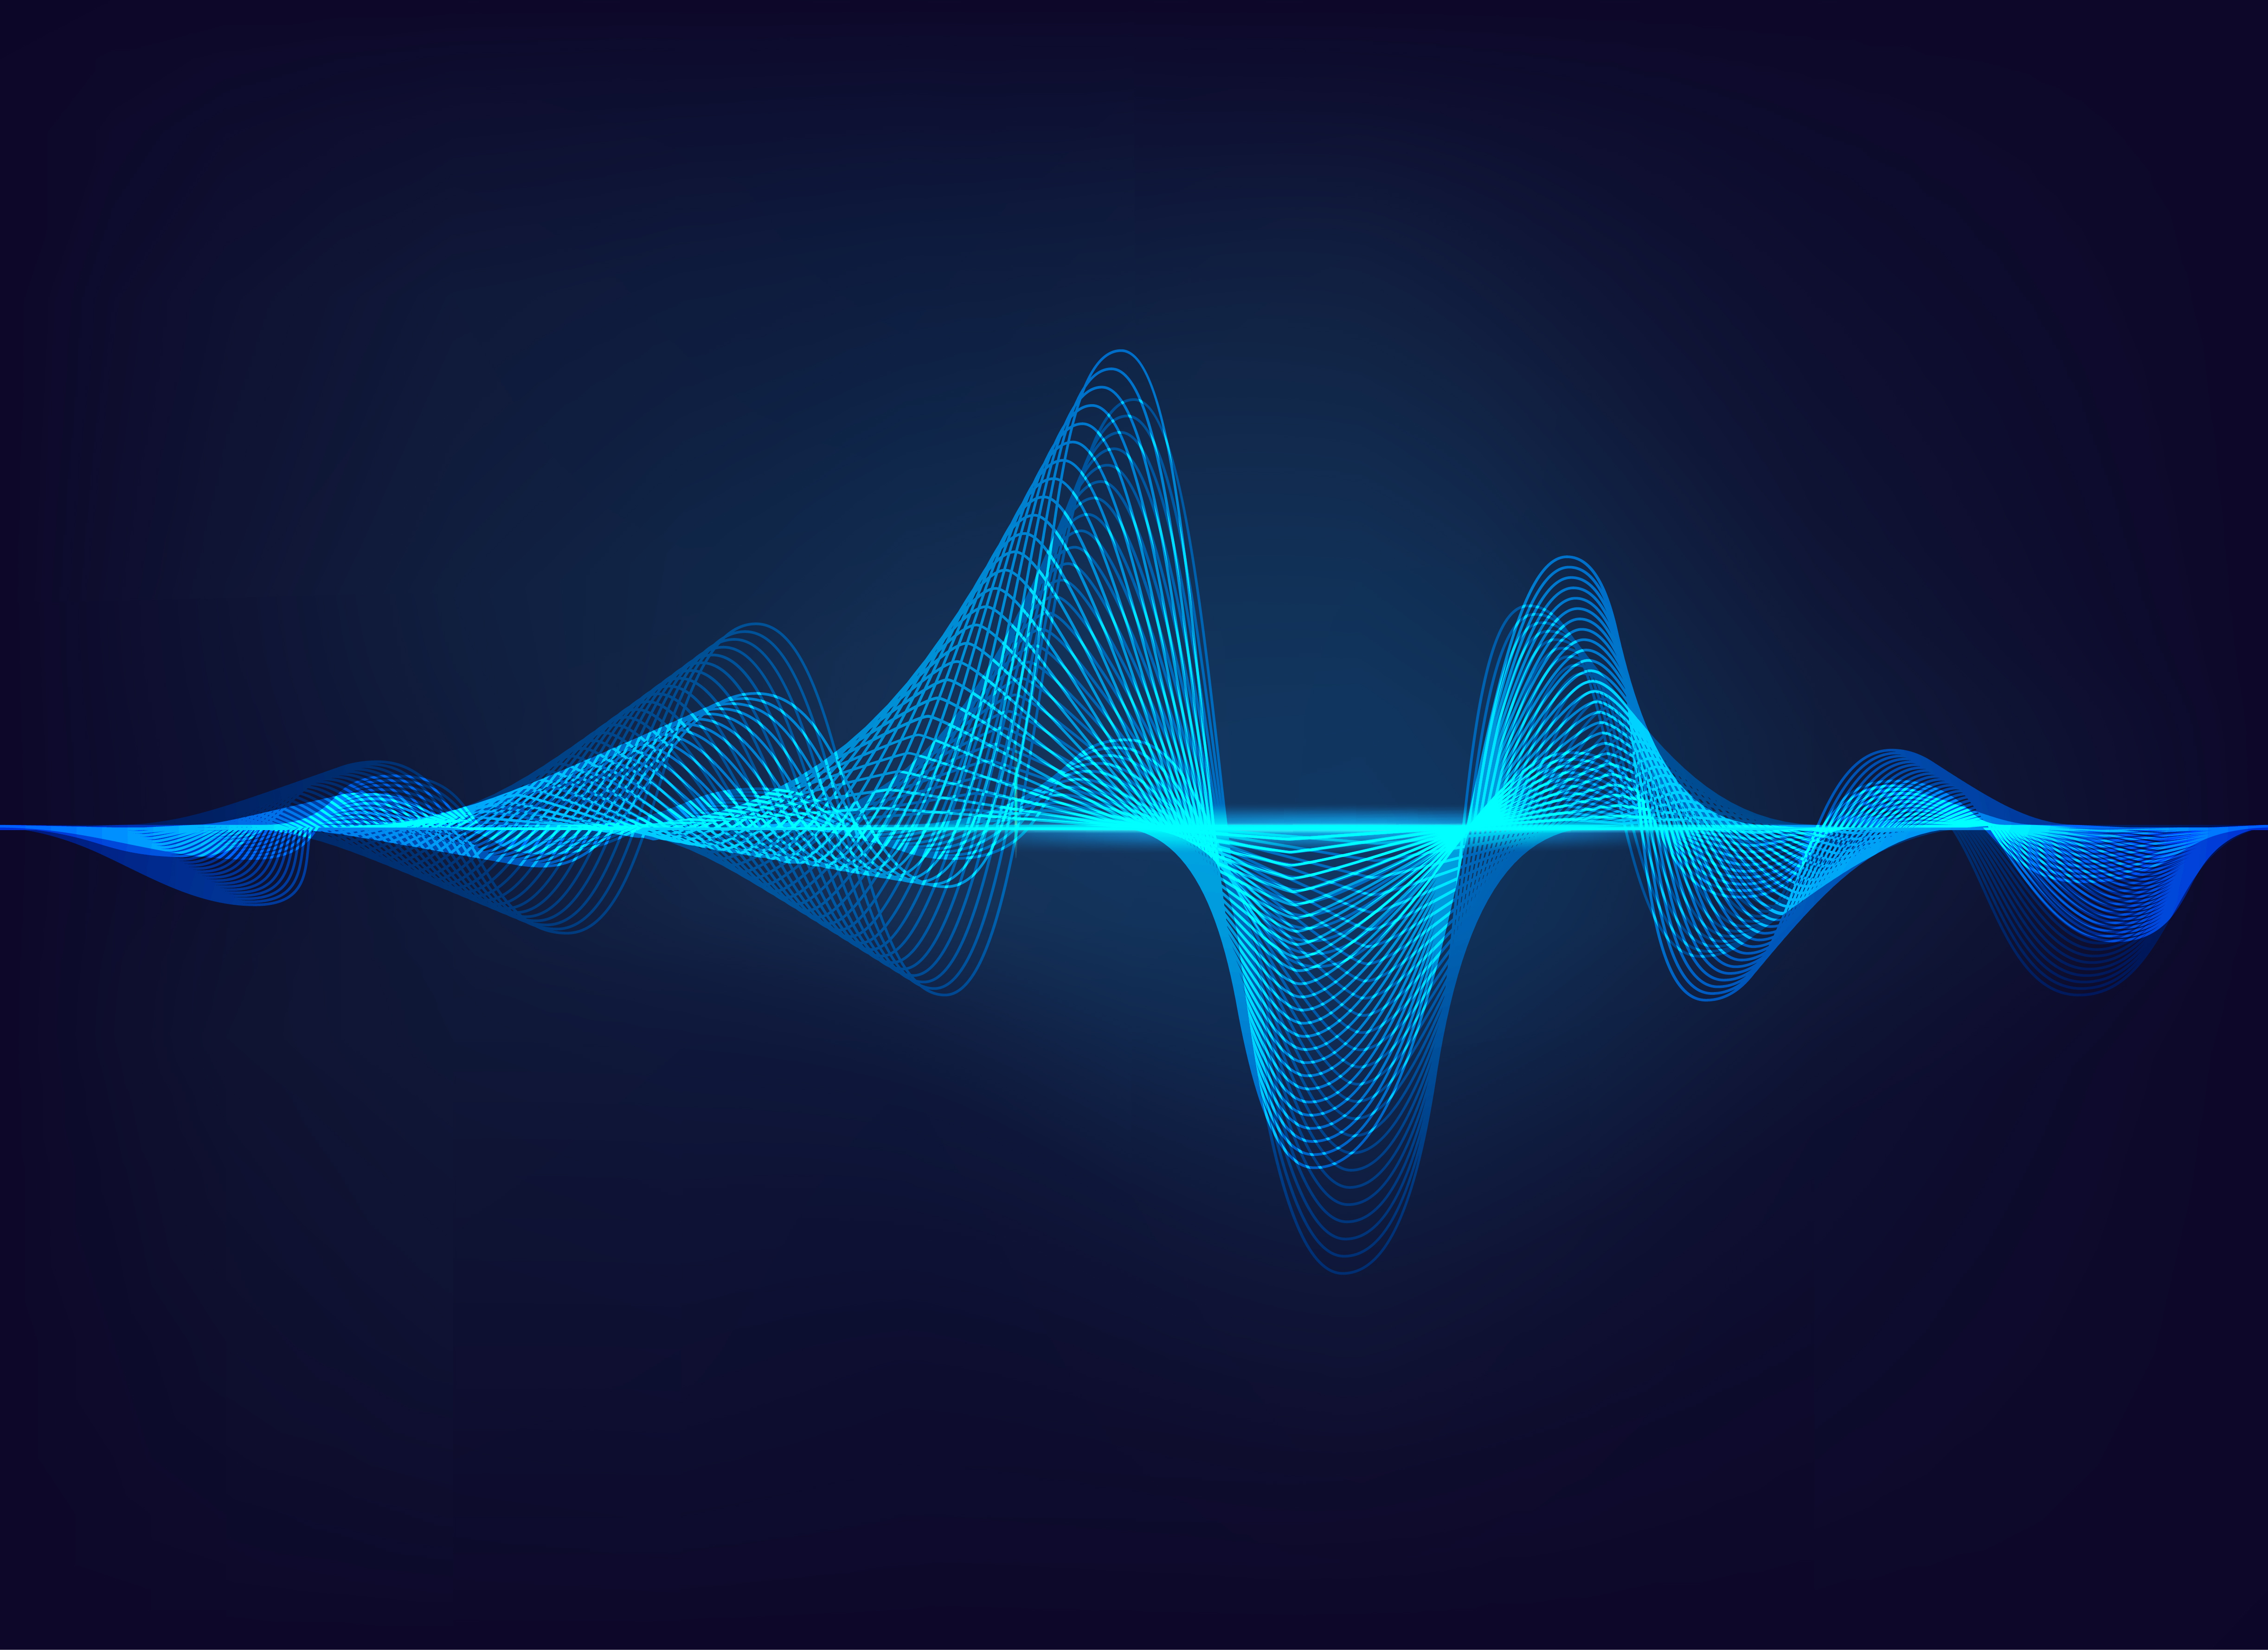 New Metamaterial Could Improve Sound Wave Technologies - Research ...